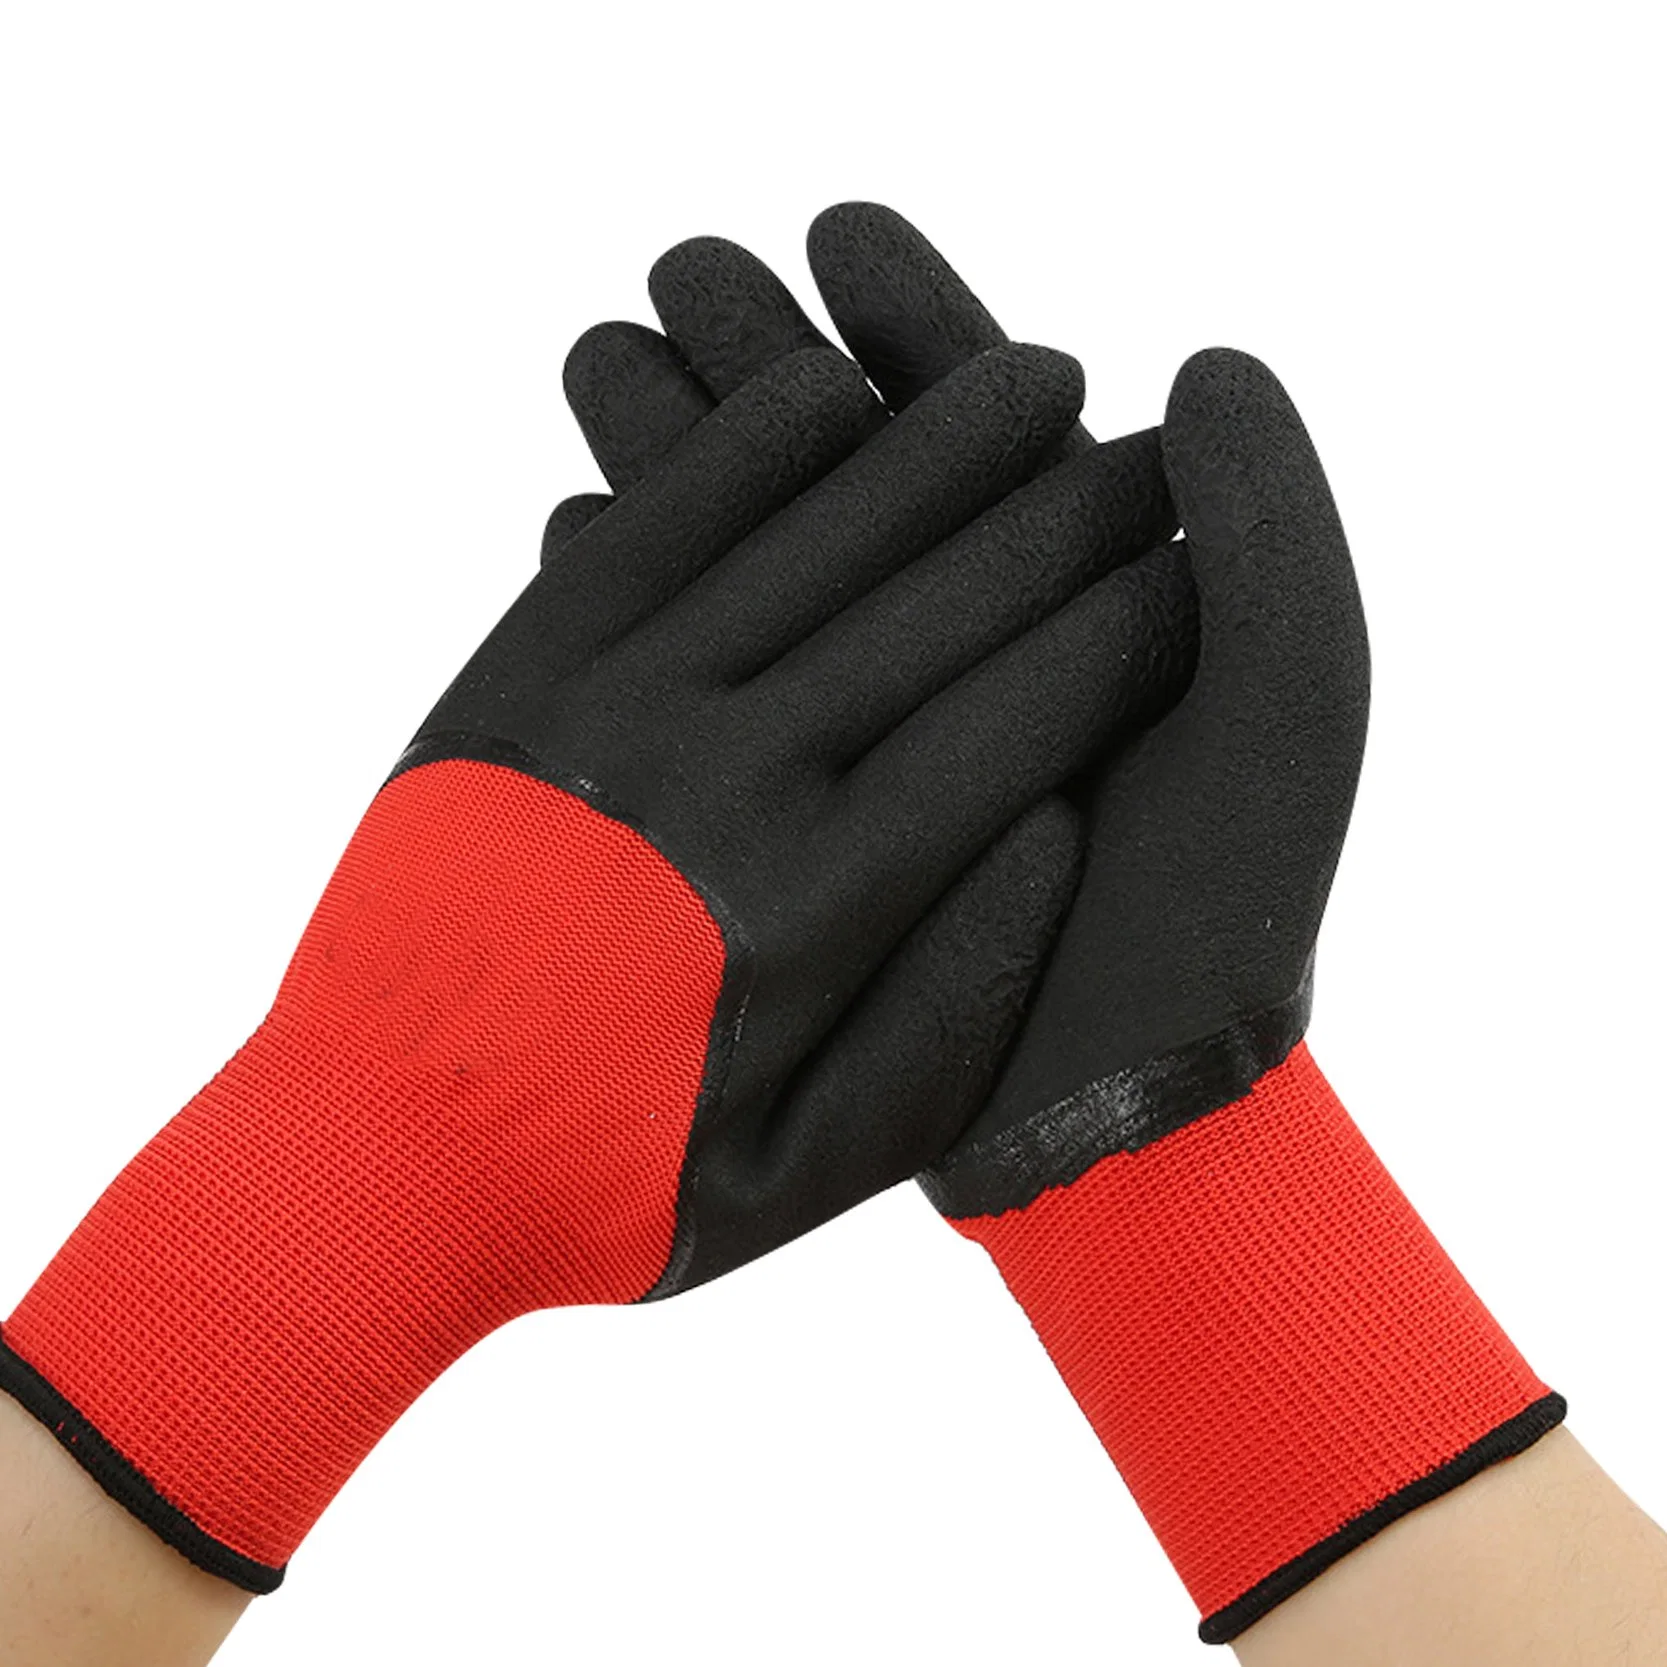 Factory Direct Sales 13G Polyester Latex Wrinkle Palm Coated Reusable Working Labor Safety Protective Hand Gloves for Gardening Household